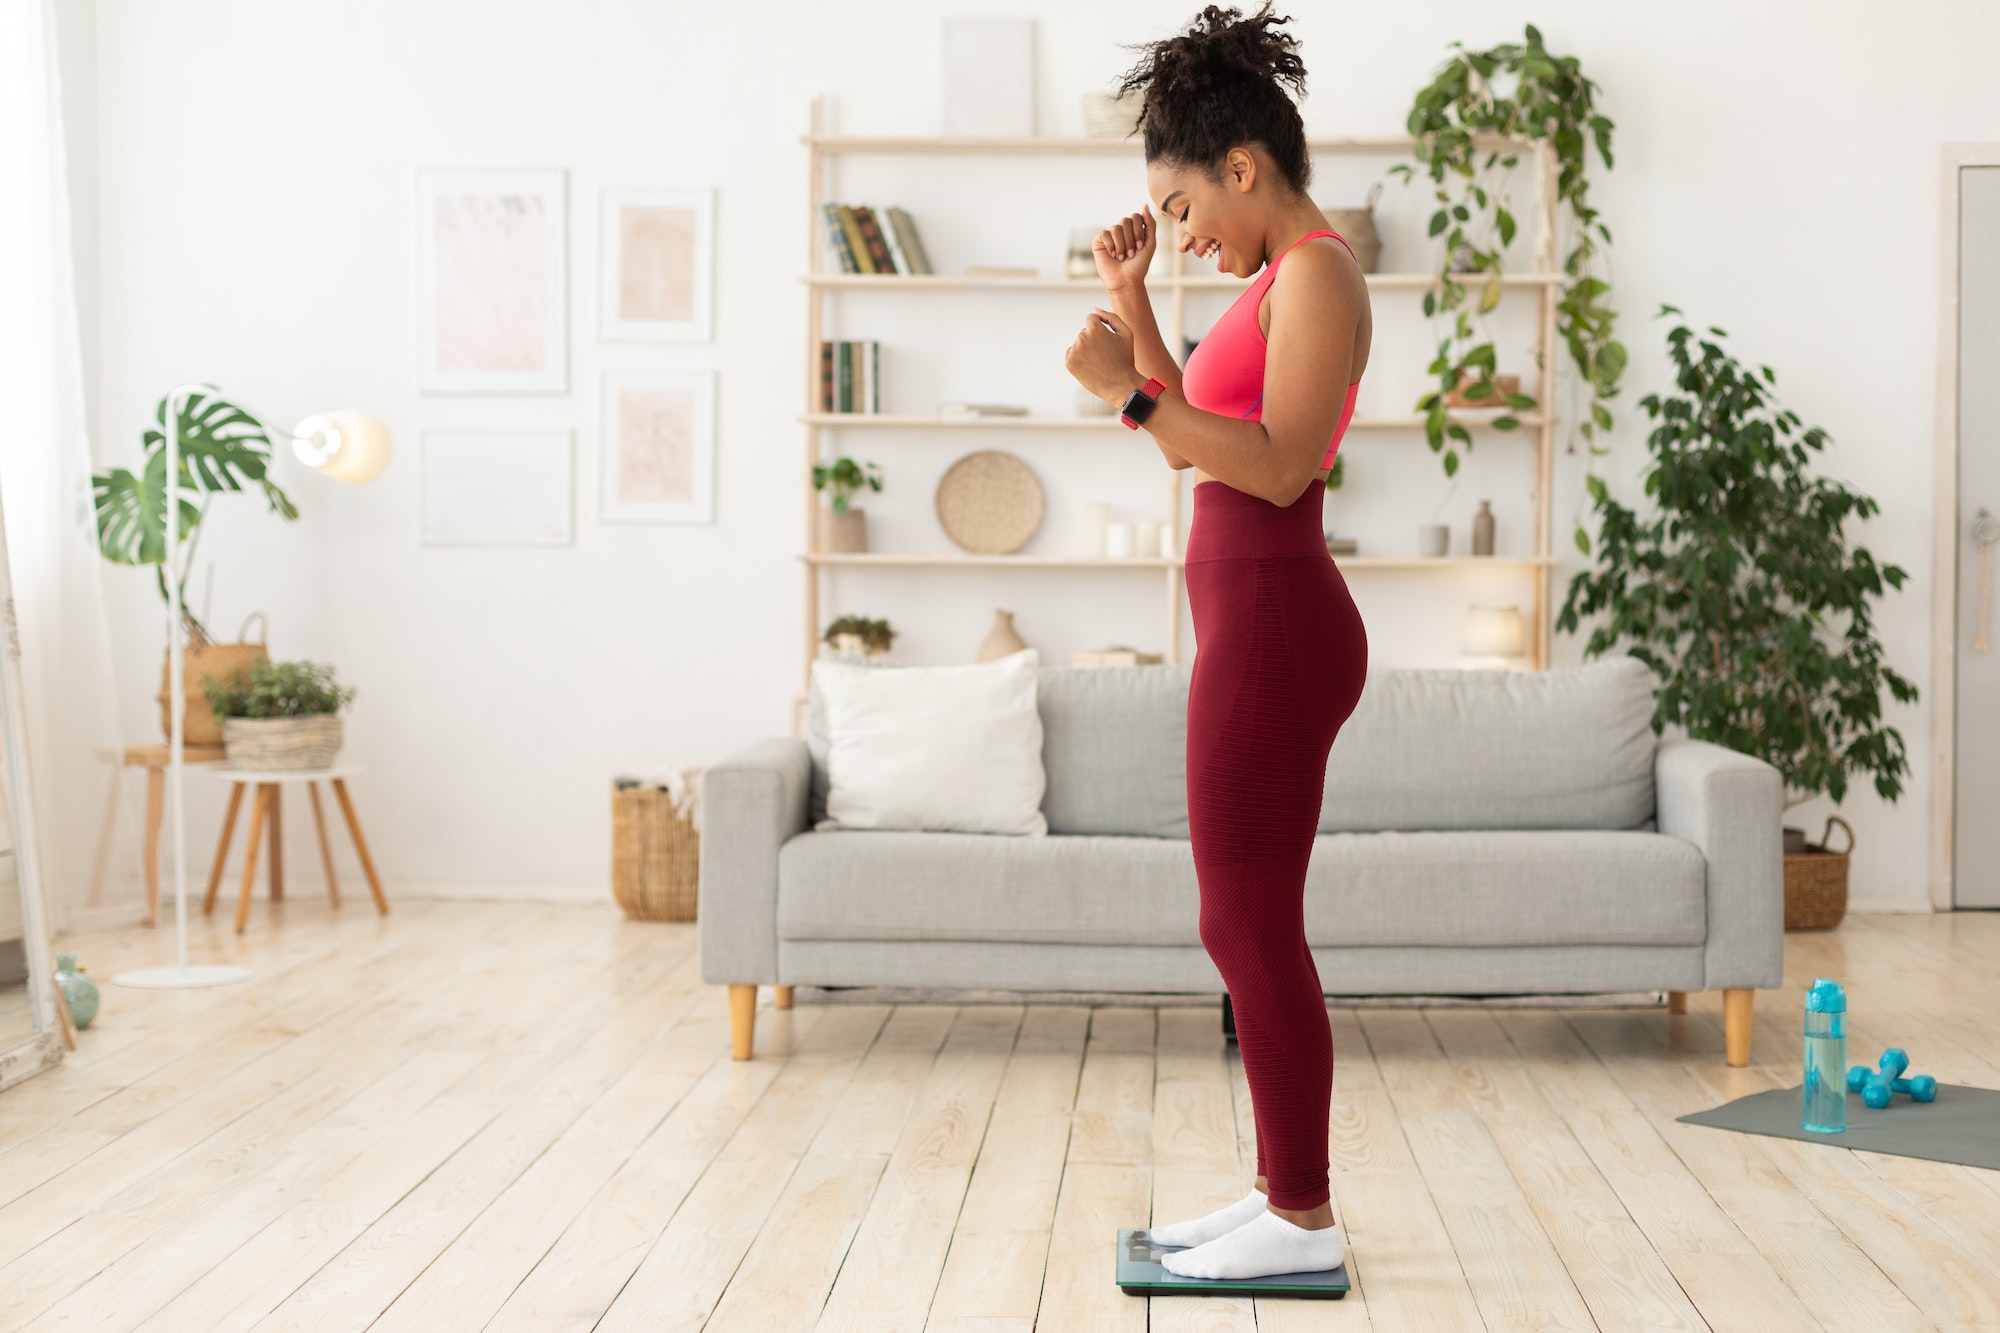 Nicety Wellness - Joyful Black Woman Weighing Herself After Successful Weight Loss Indoors